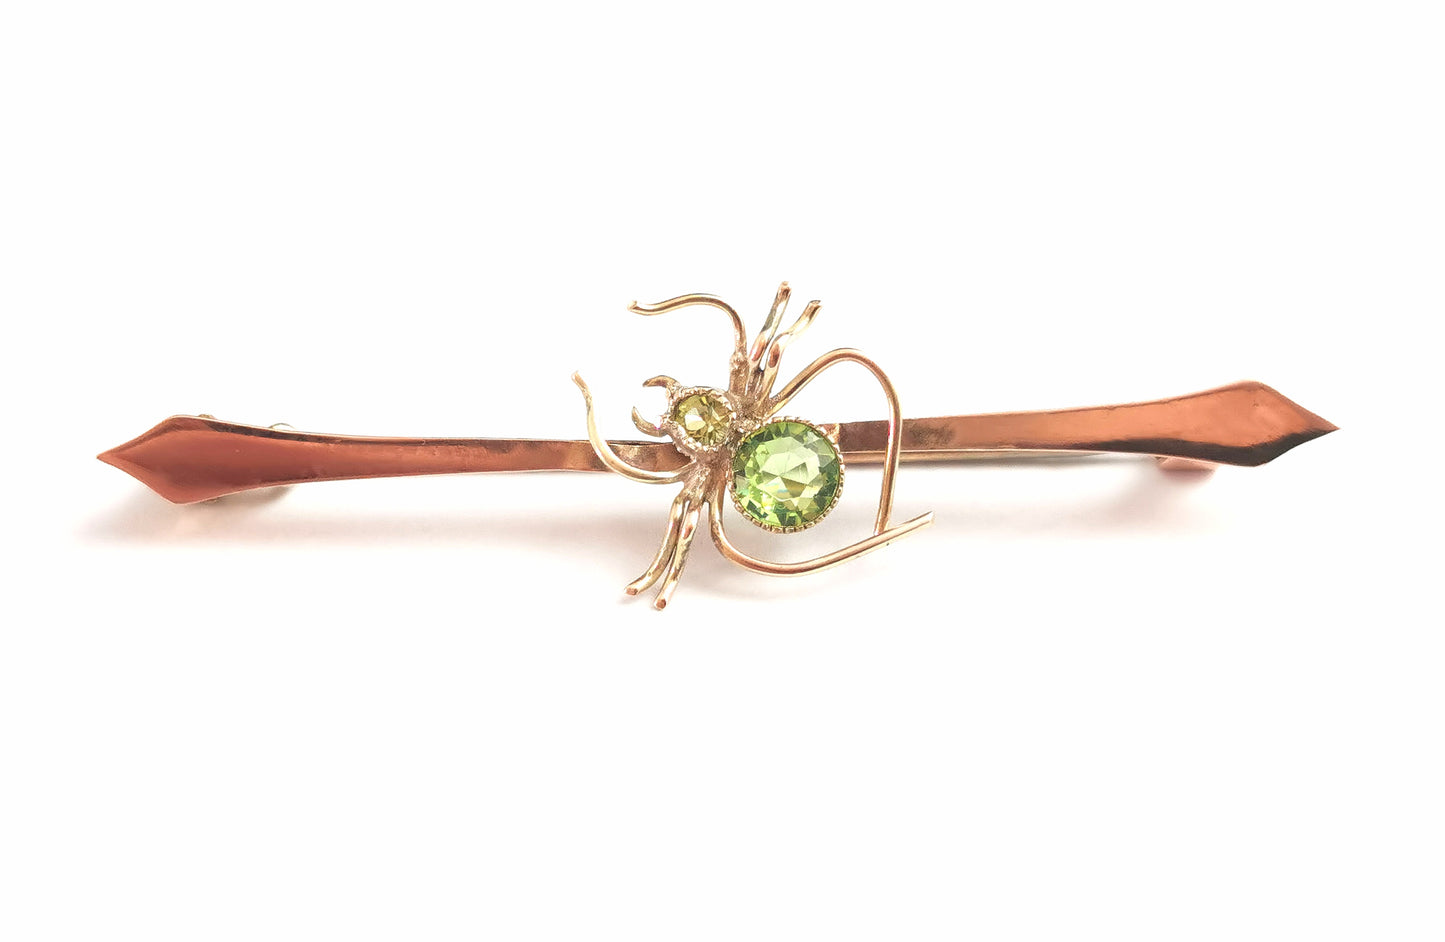 Antique spider brooch, 9ct gold, Peridot and paste